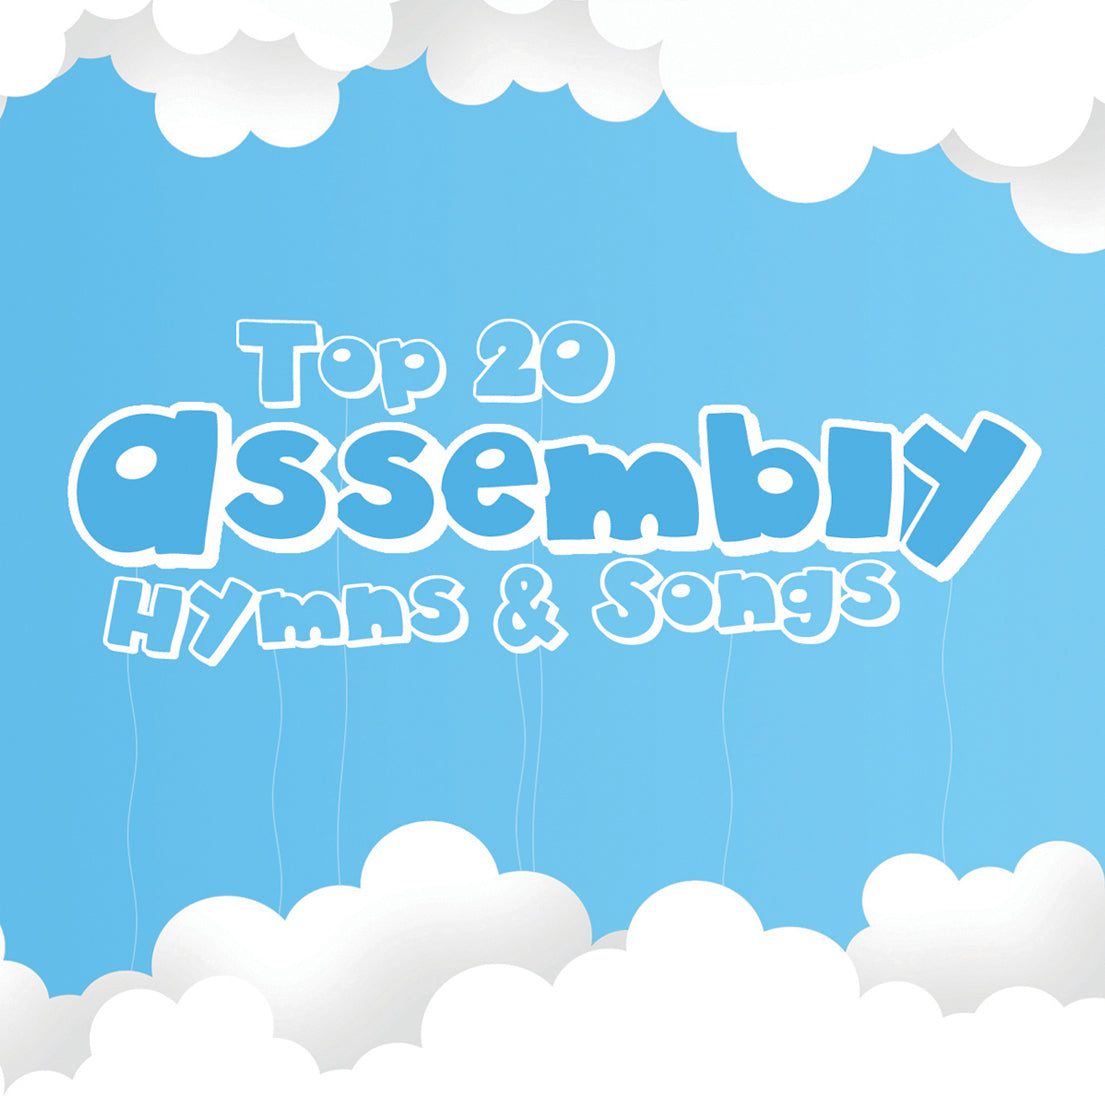 Top 20 Assembly Hymns & Songs